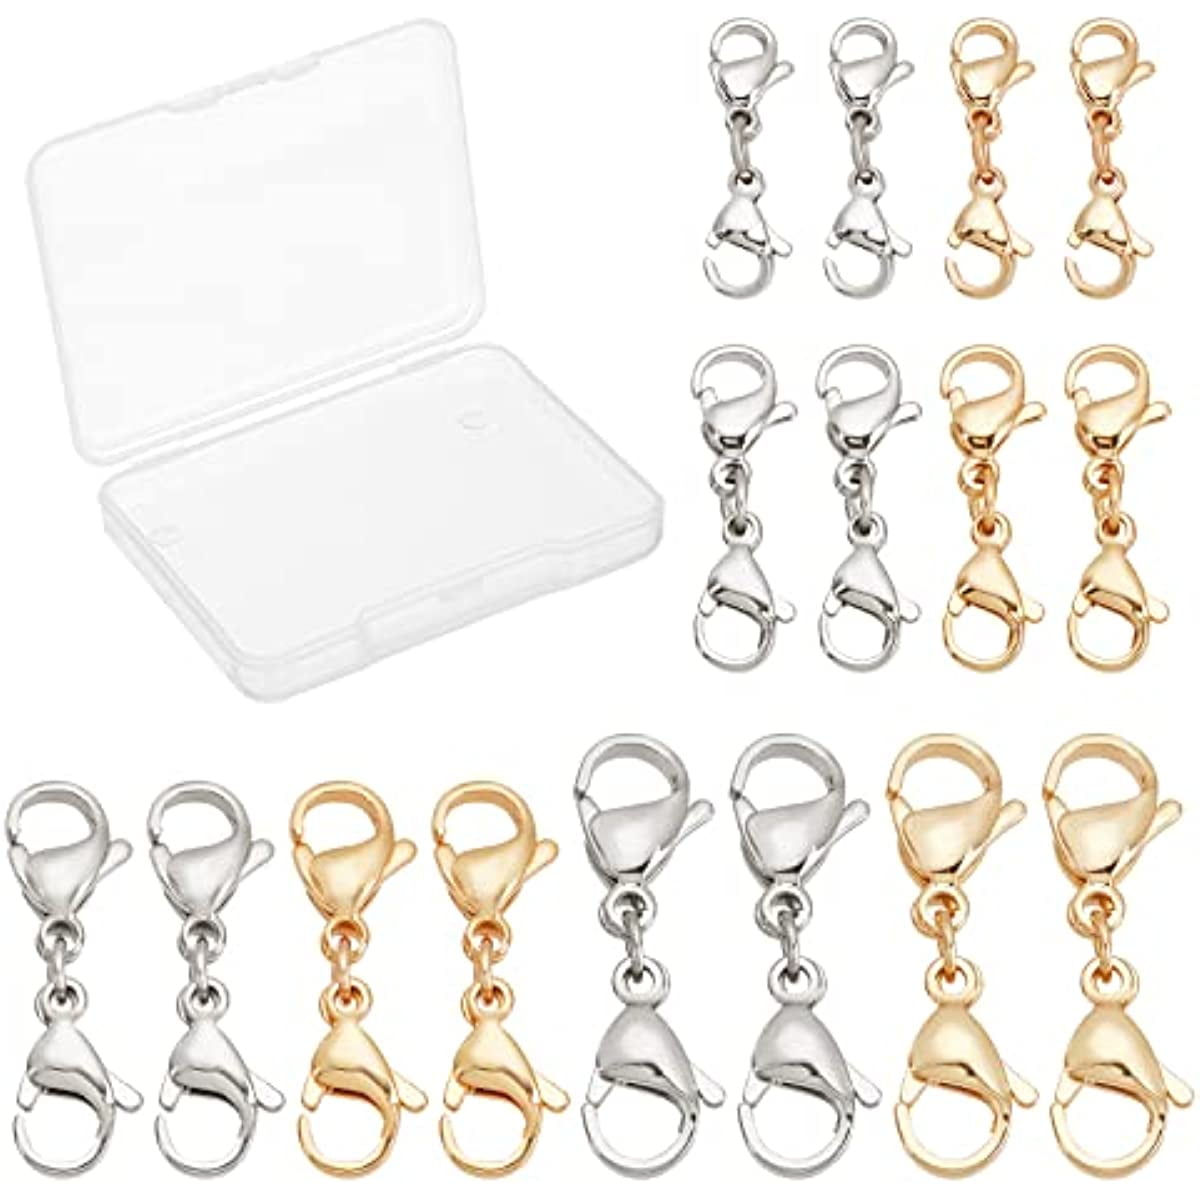 Zpsolution Double Small Carabiner Clips - Zipper Clip Theft Deterrent -  Holding The Zipper Closed - Zipper Pull Replacement